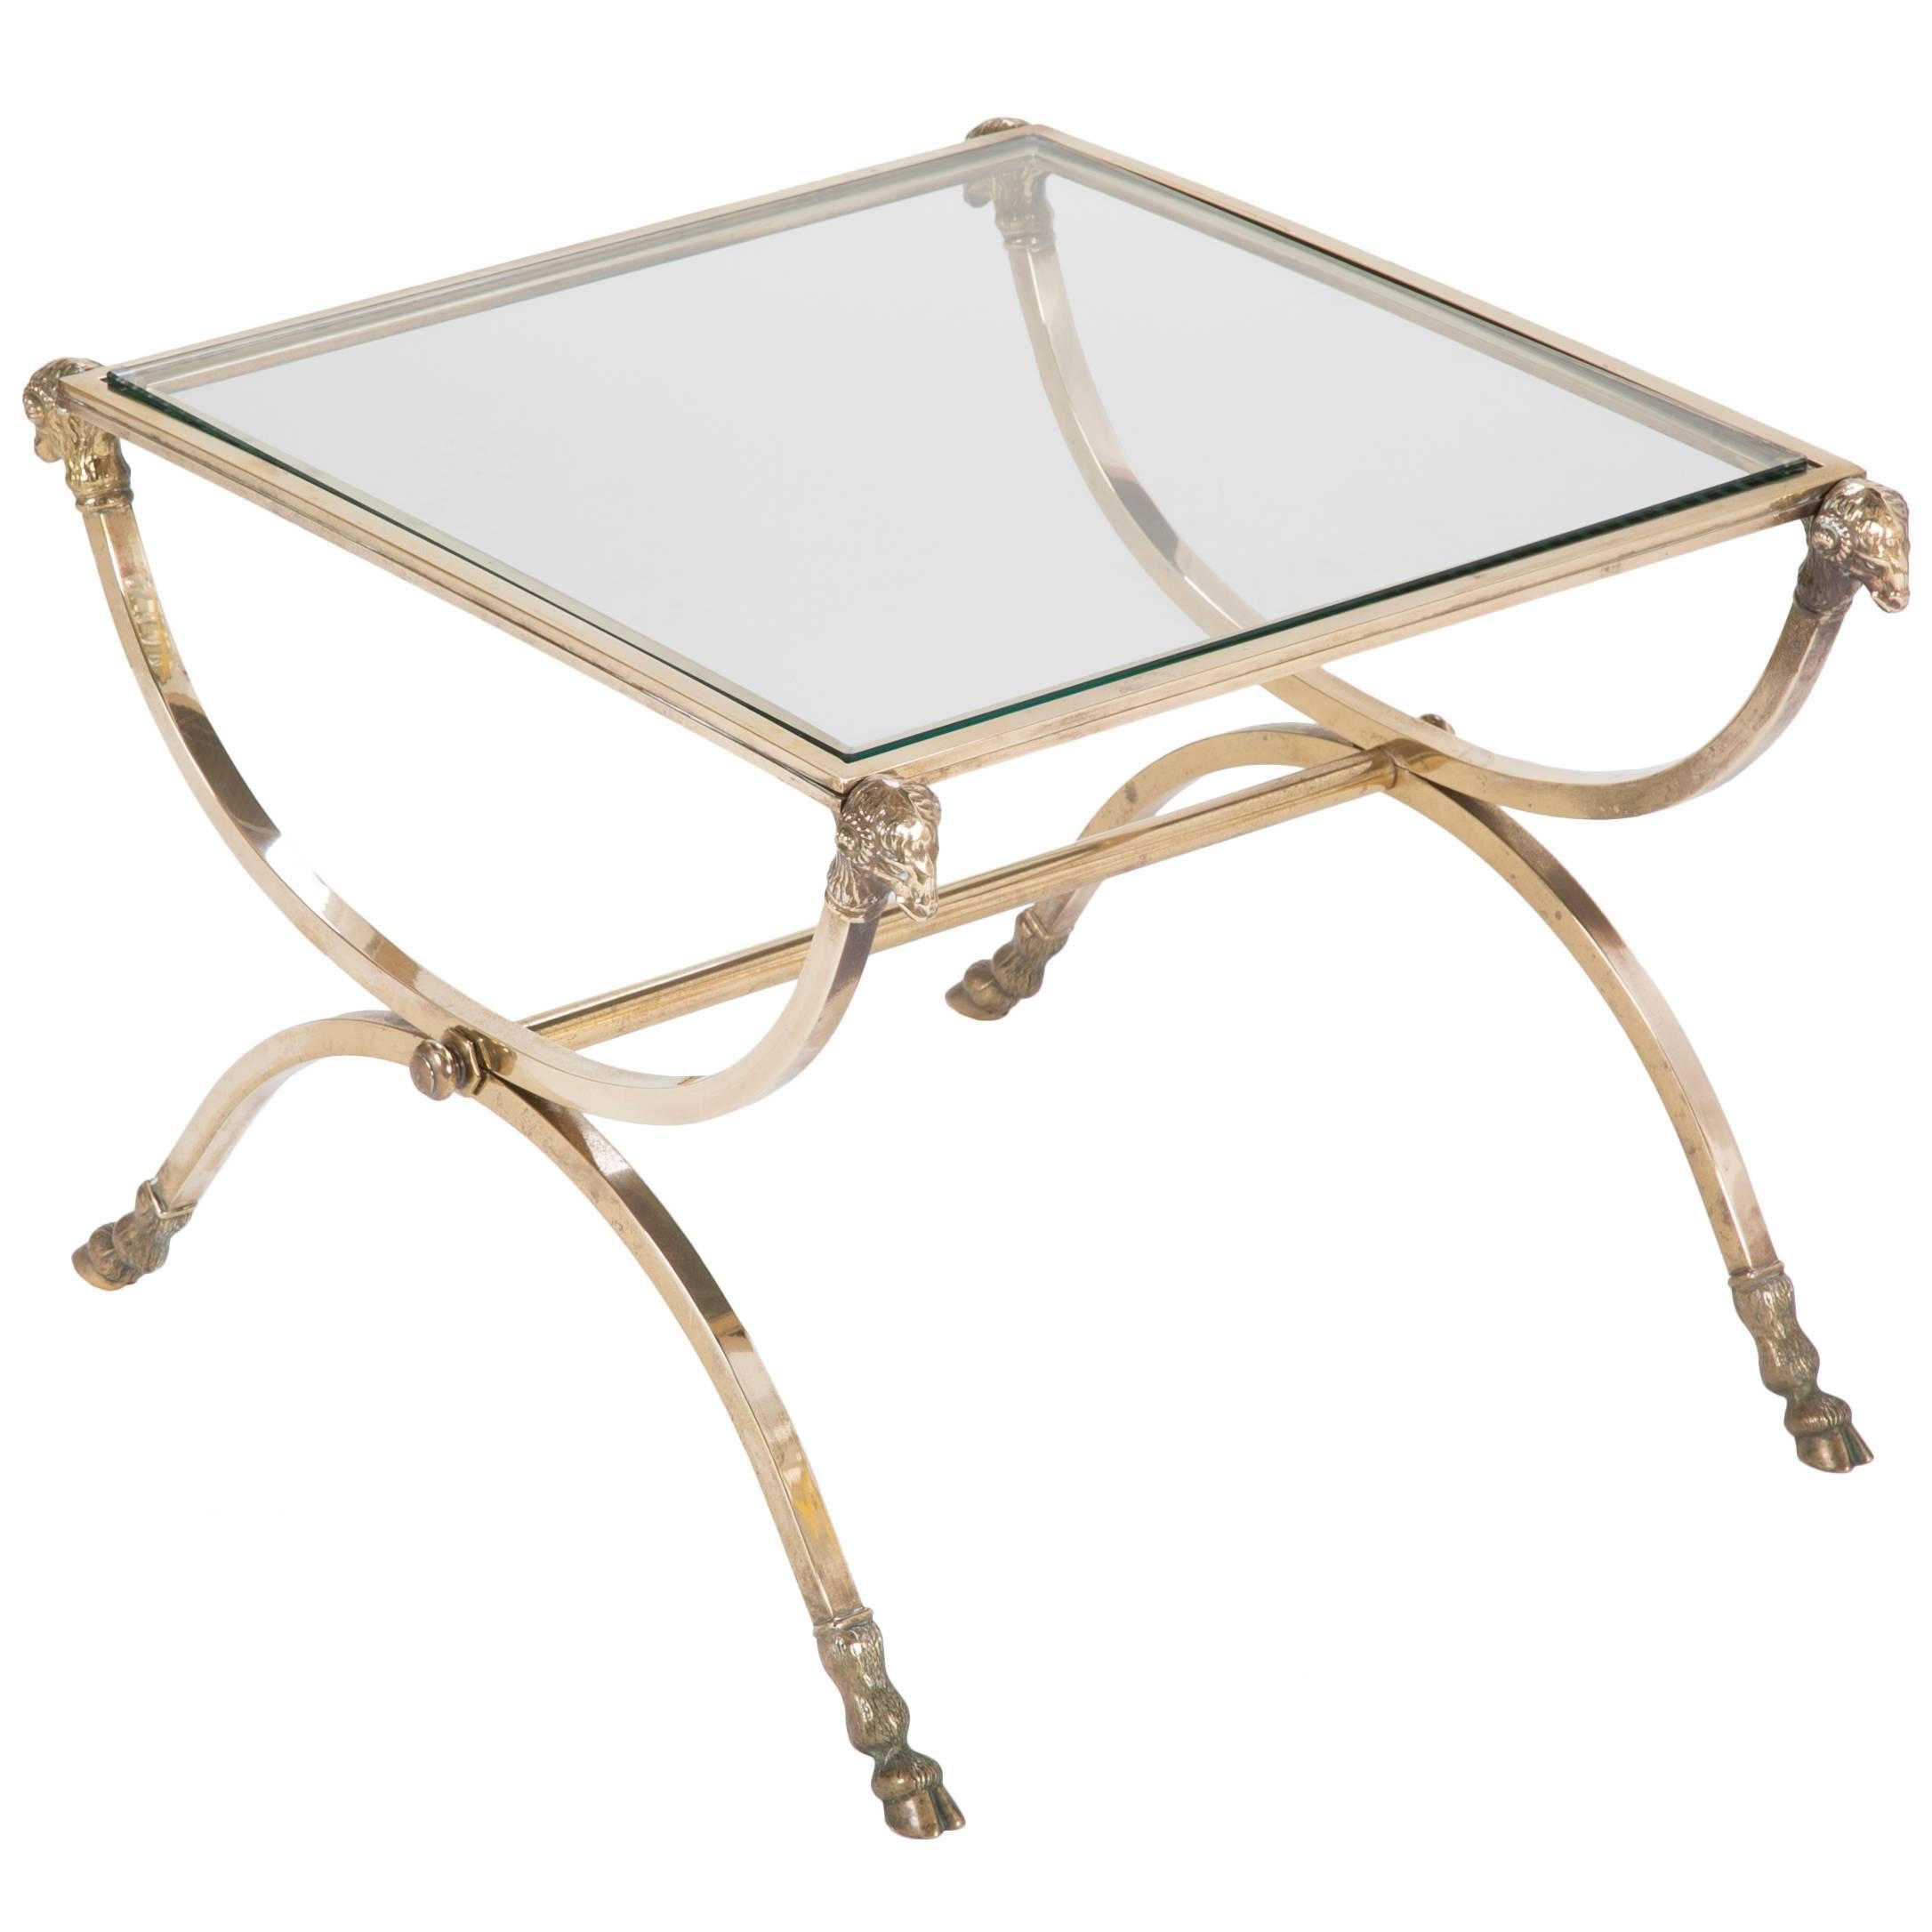 Italian Mid-Century Glass Topped Bronze Side Table with Rams Heads and Hoof Feet For Sale